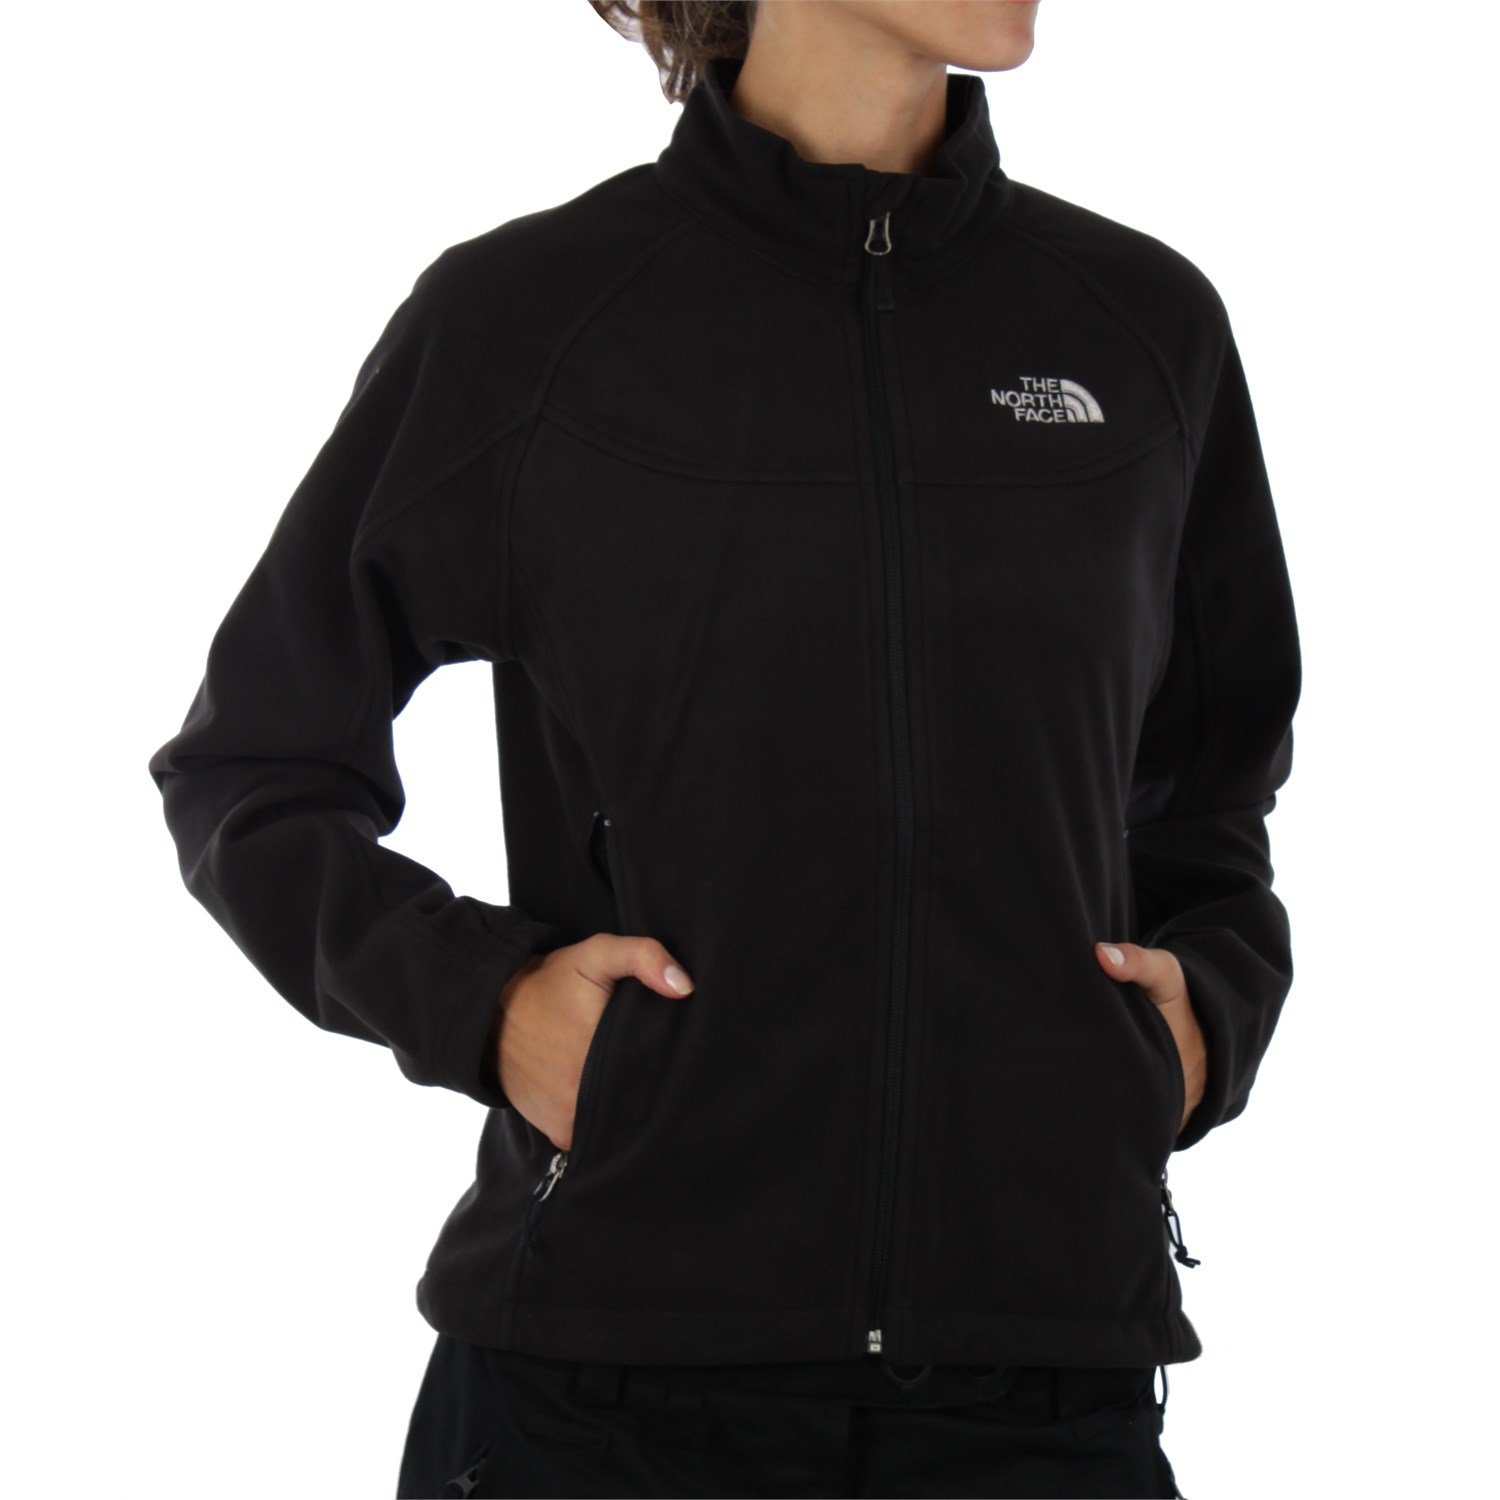 The North Face Windwall 1 Jacket - Women's